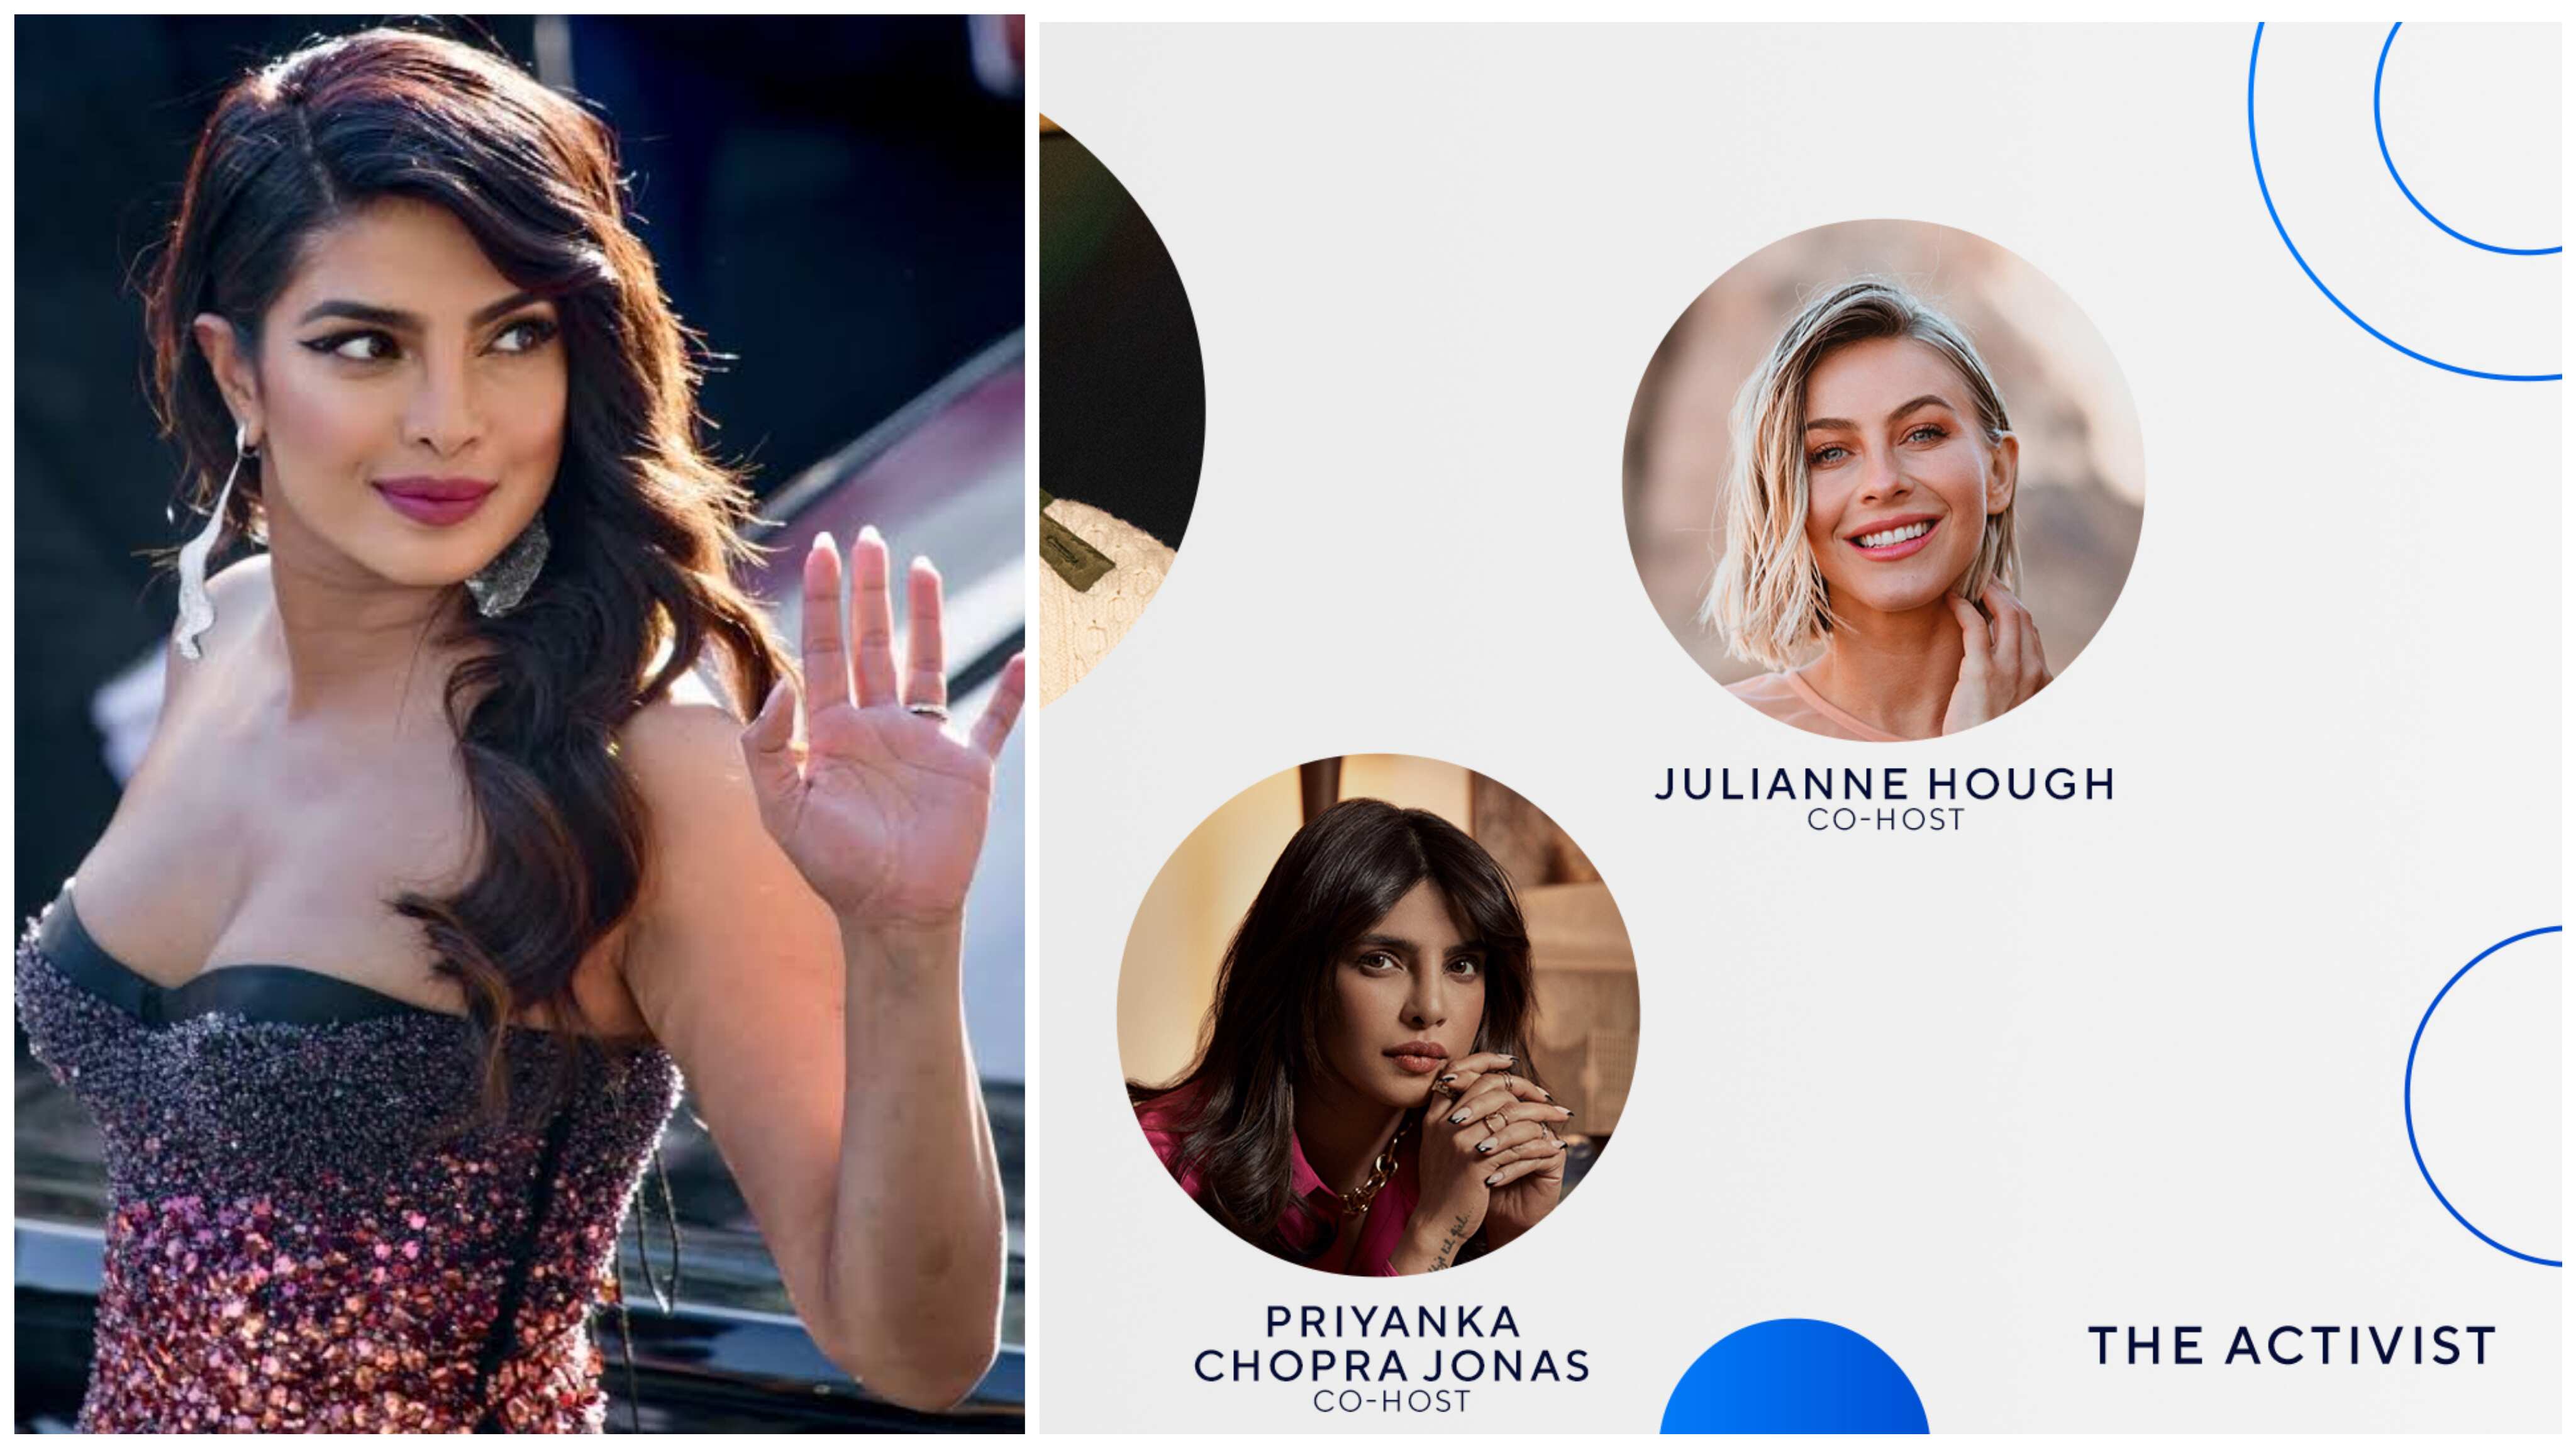 The Activist After Julianne Hough Priyanka Chopra Also Issues Apology For Involvement On Cbs Show